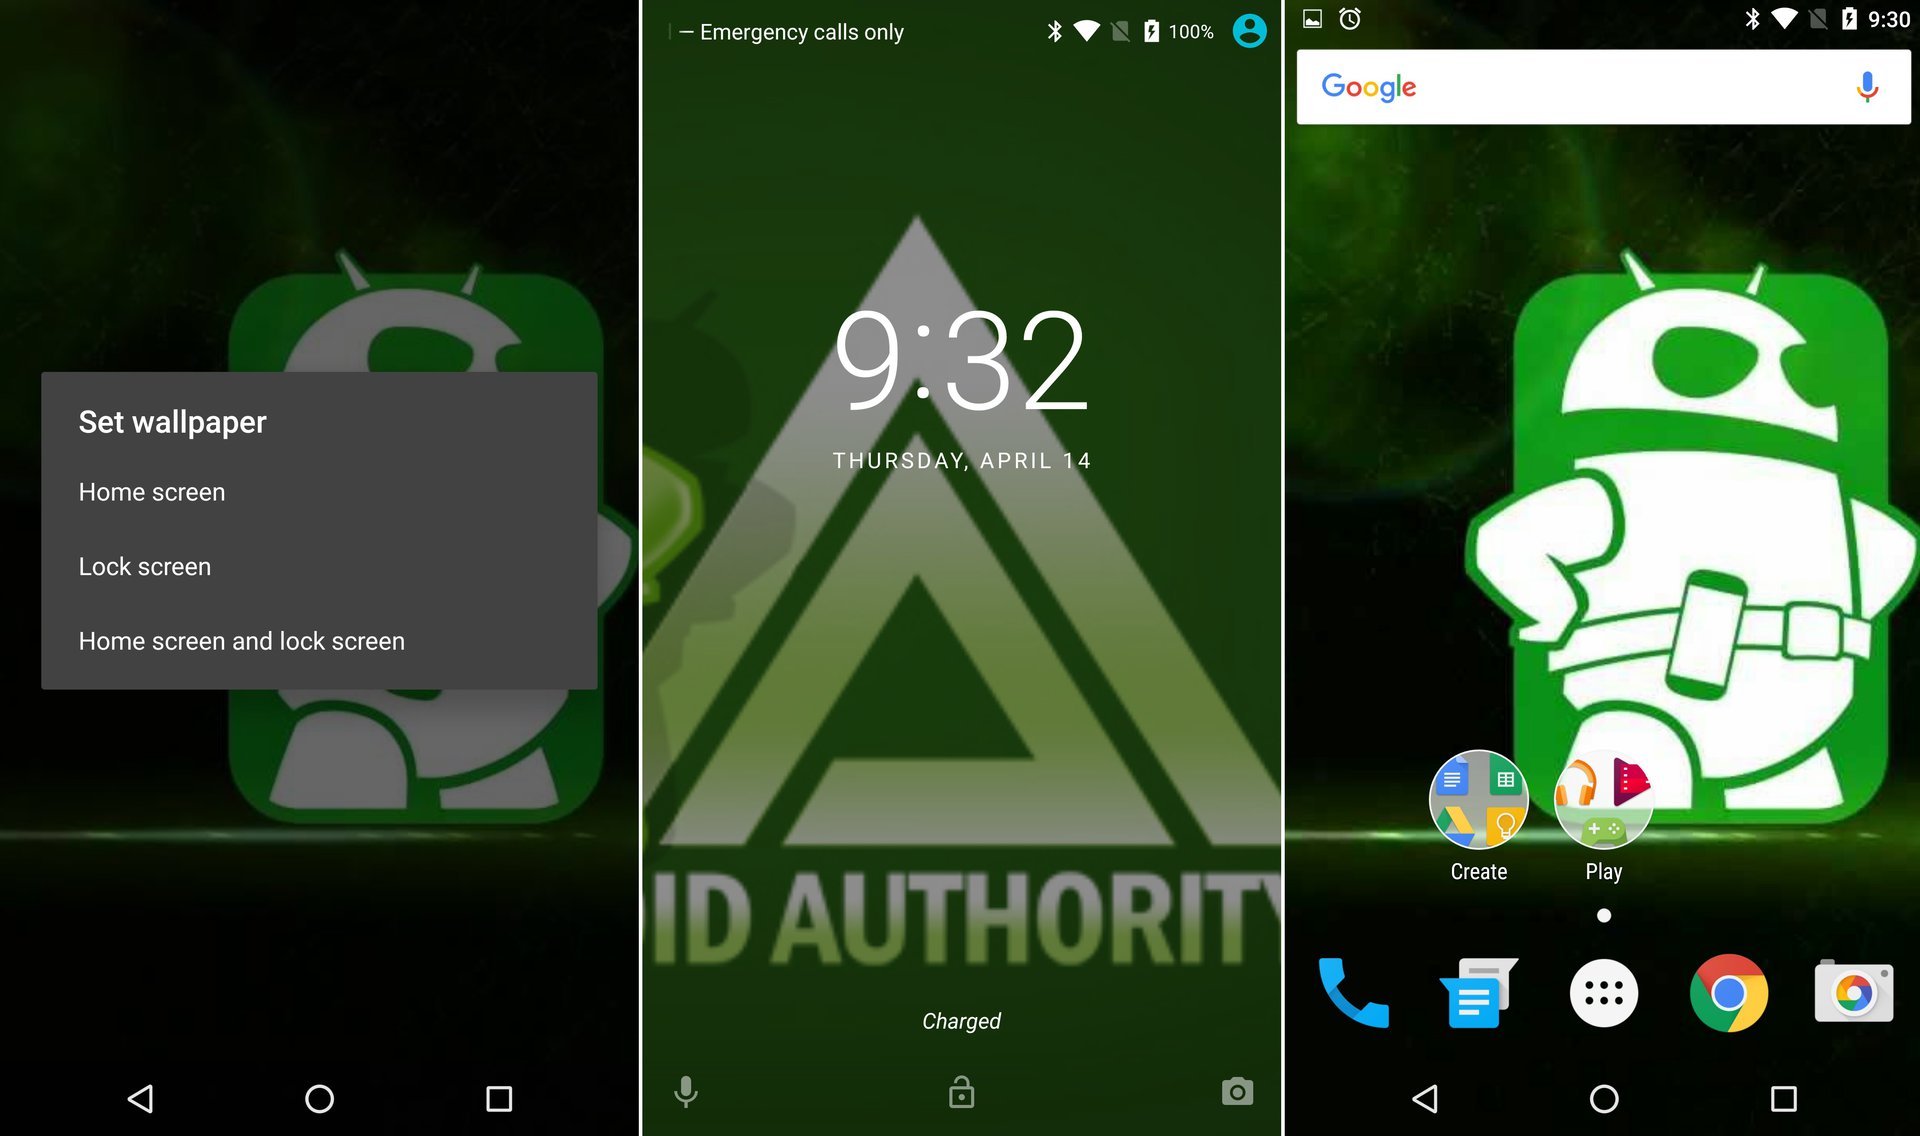 How to Turn Your Android's Wallpaper Into a Live Widget